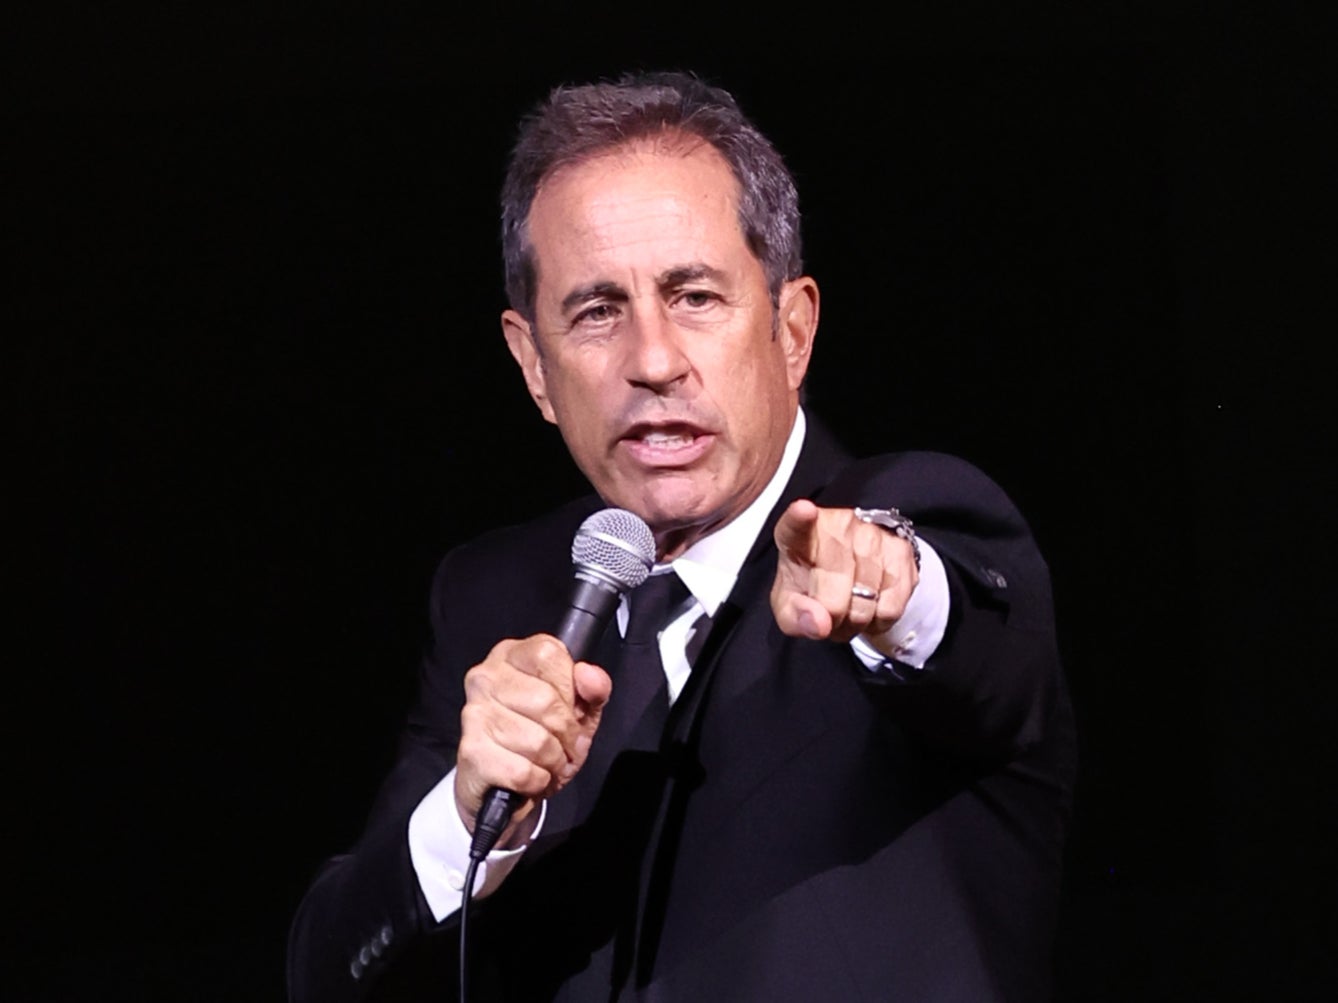 Seinfeld has declared the movie business dead